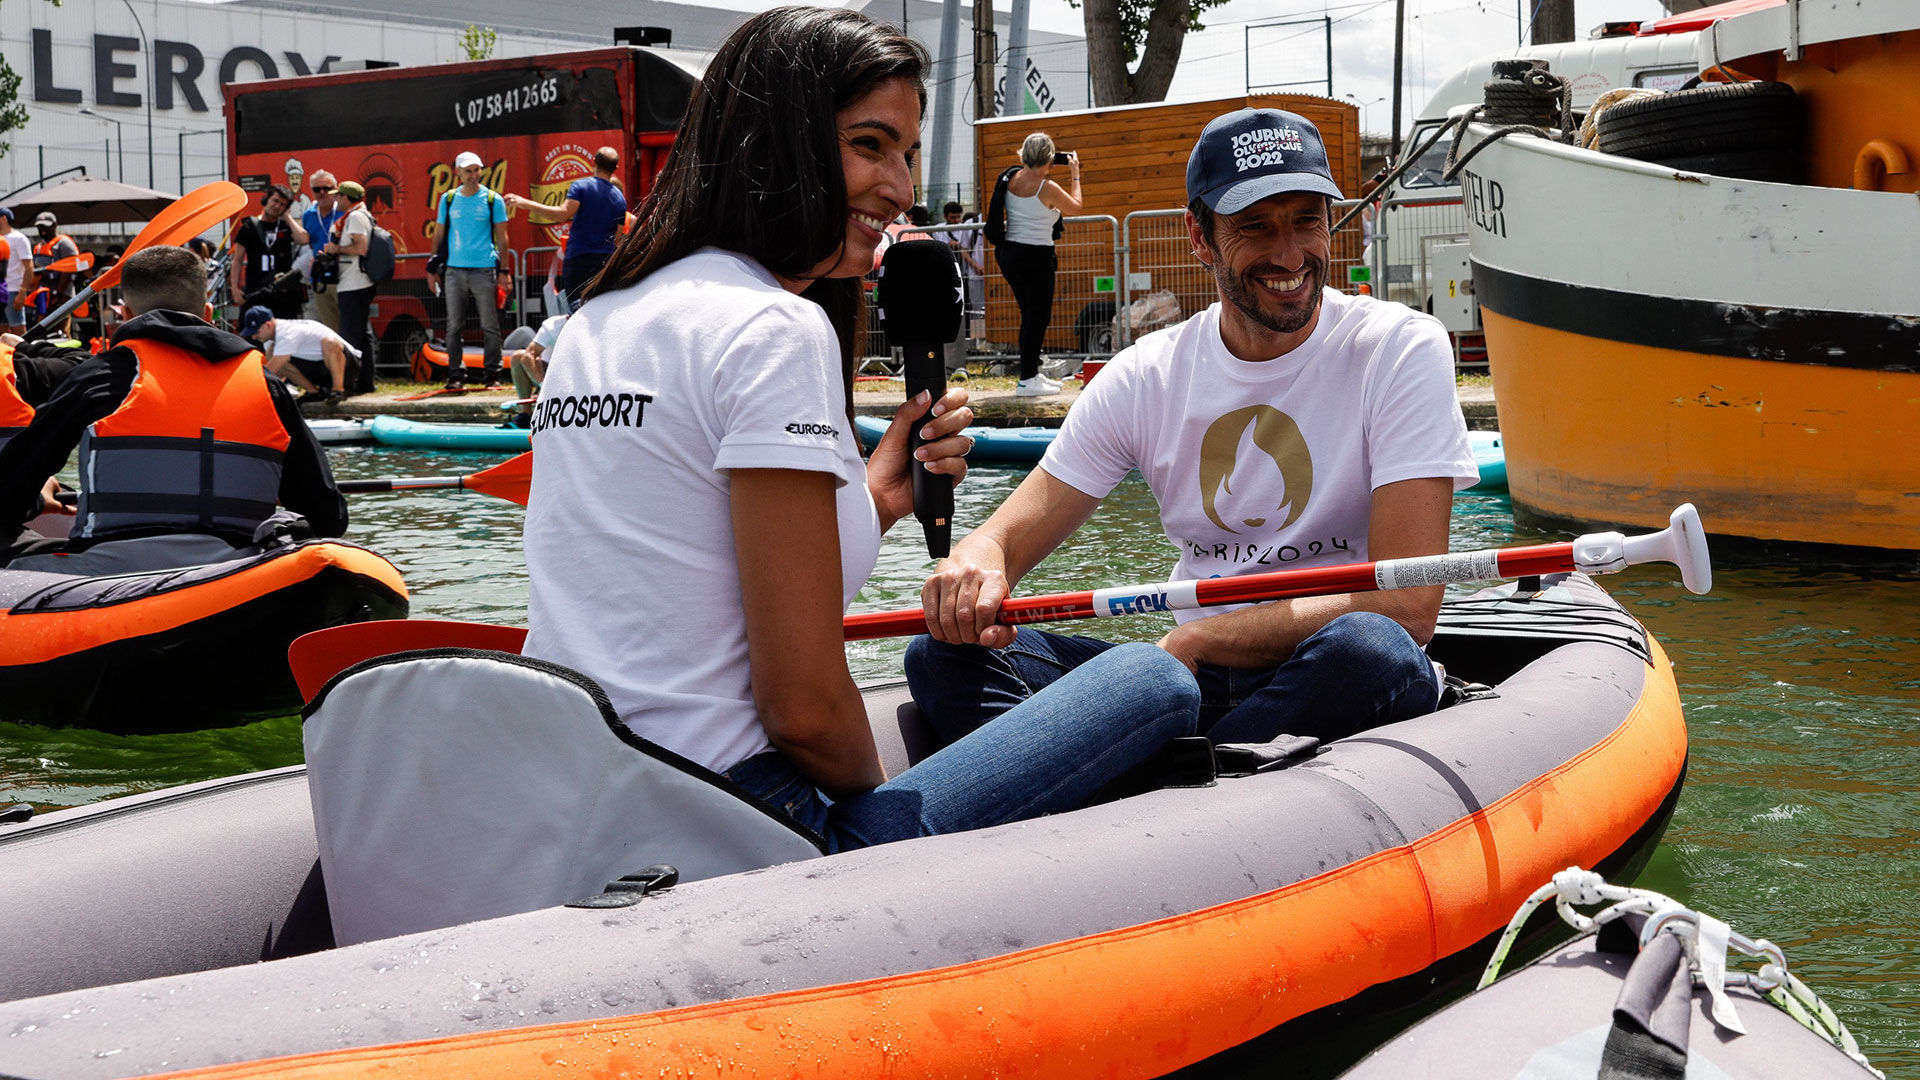 Paris 2024 president and Olympic canoe slalom champion Tony Estanguet chats and shares a boat with a Eurosport reporter during Olympic Day 2022 (Paris 2024)